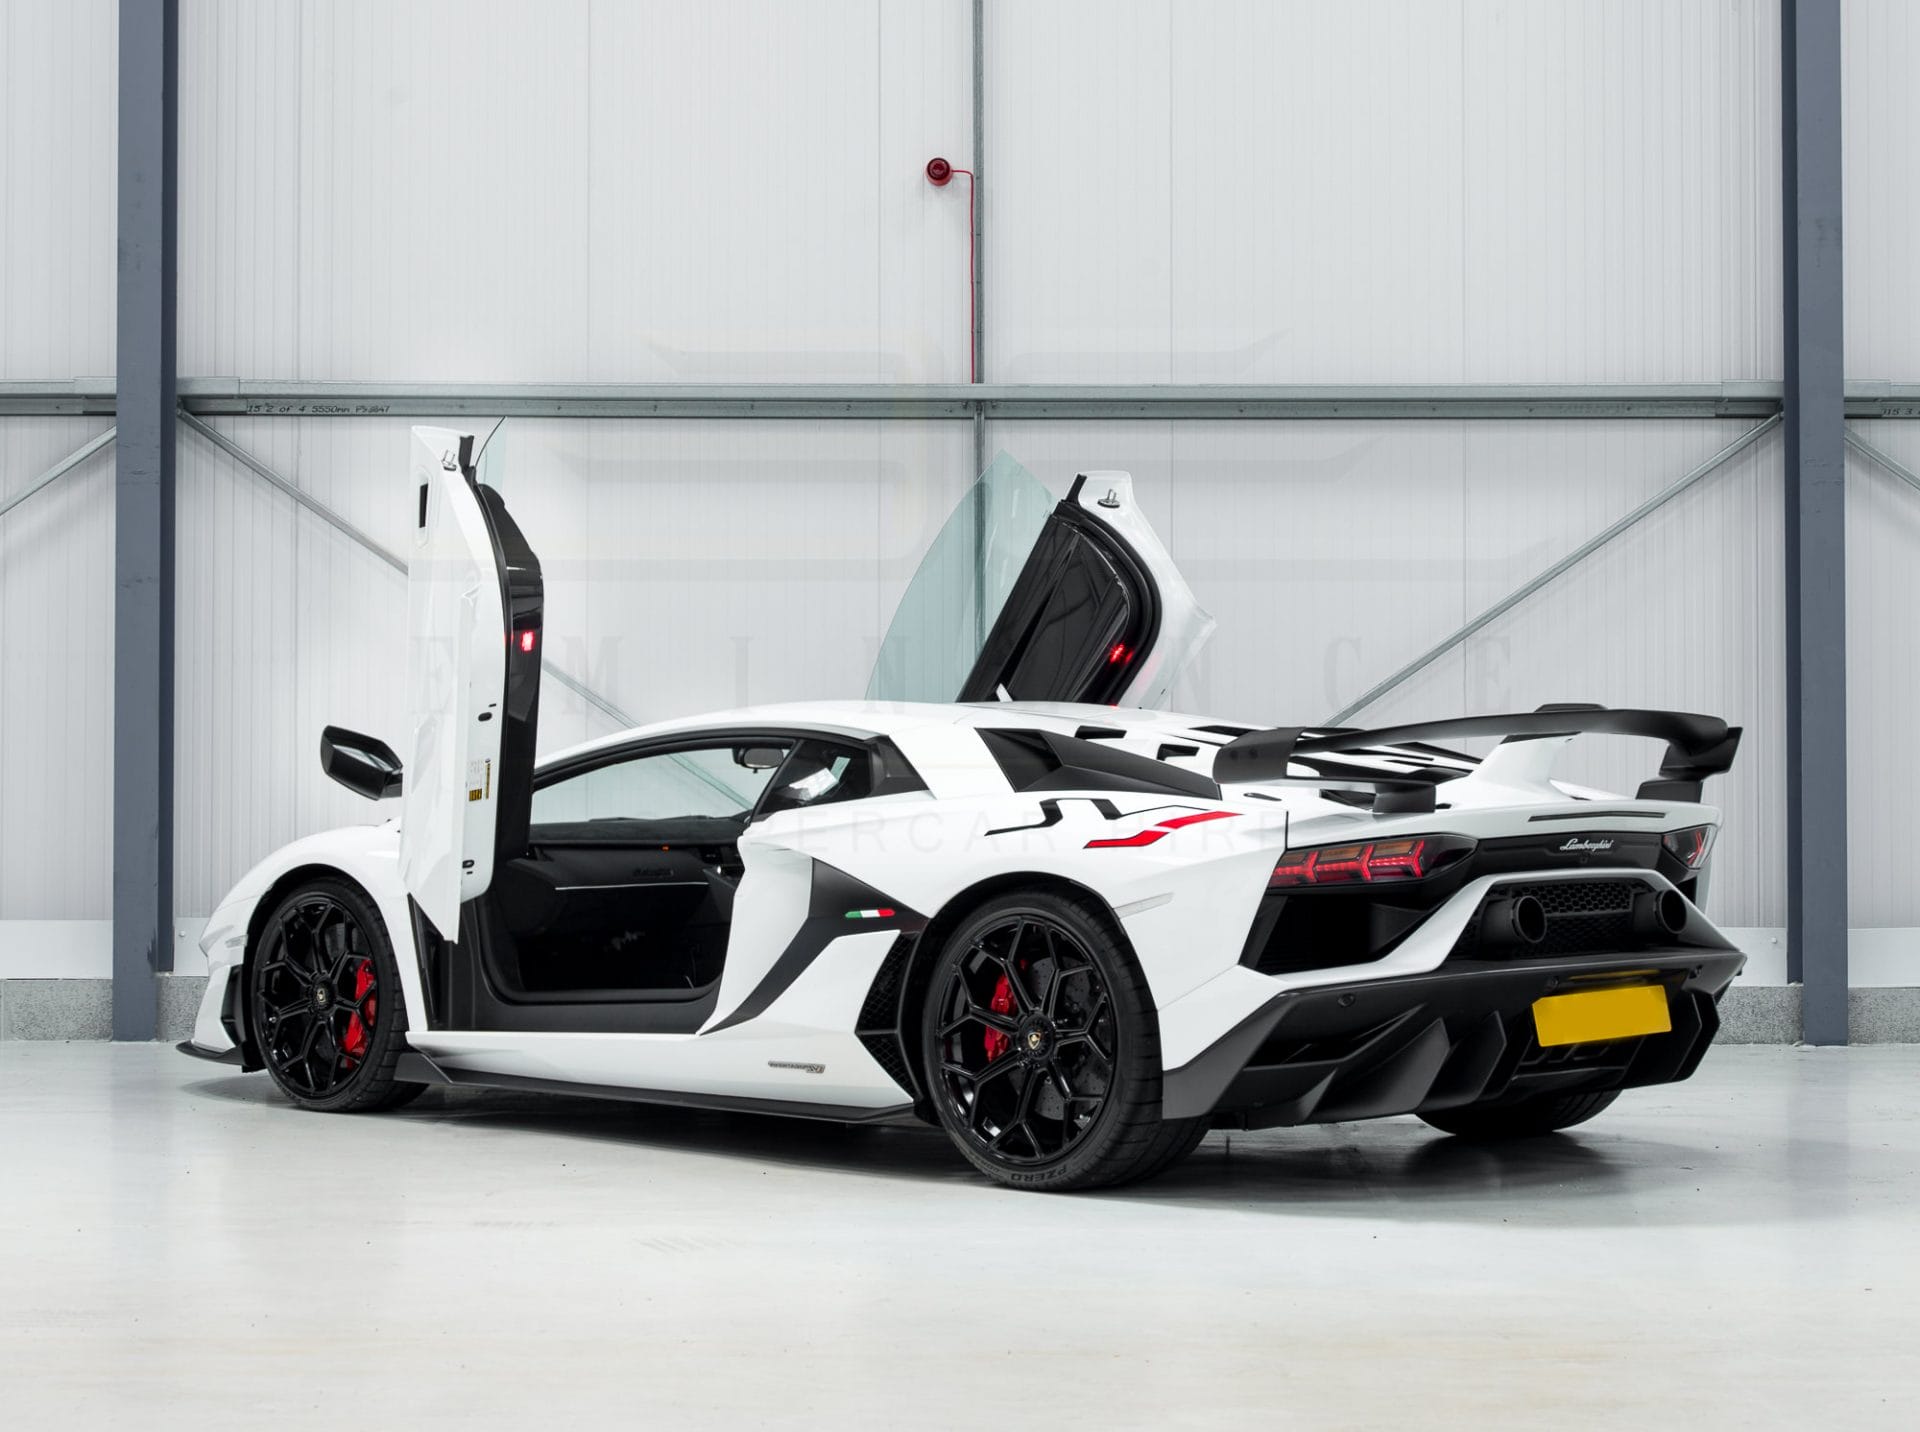 White lamborghini aventador with doors open, parked in a modern garage with a clean, grey background.